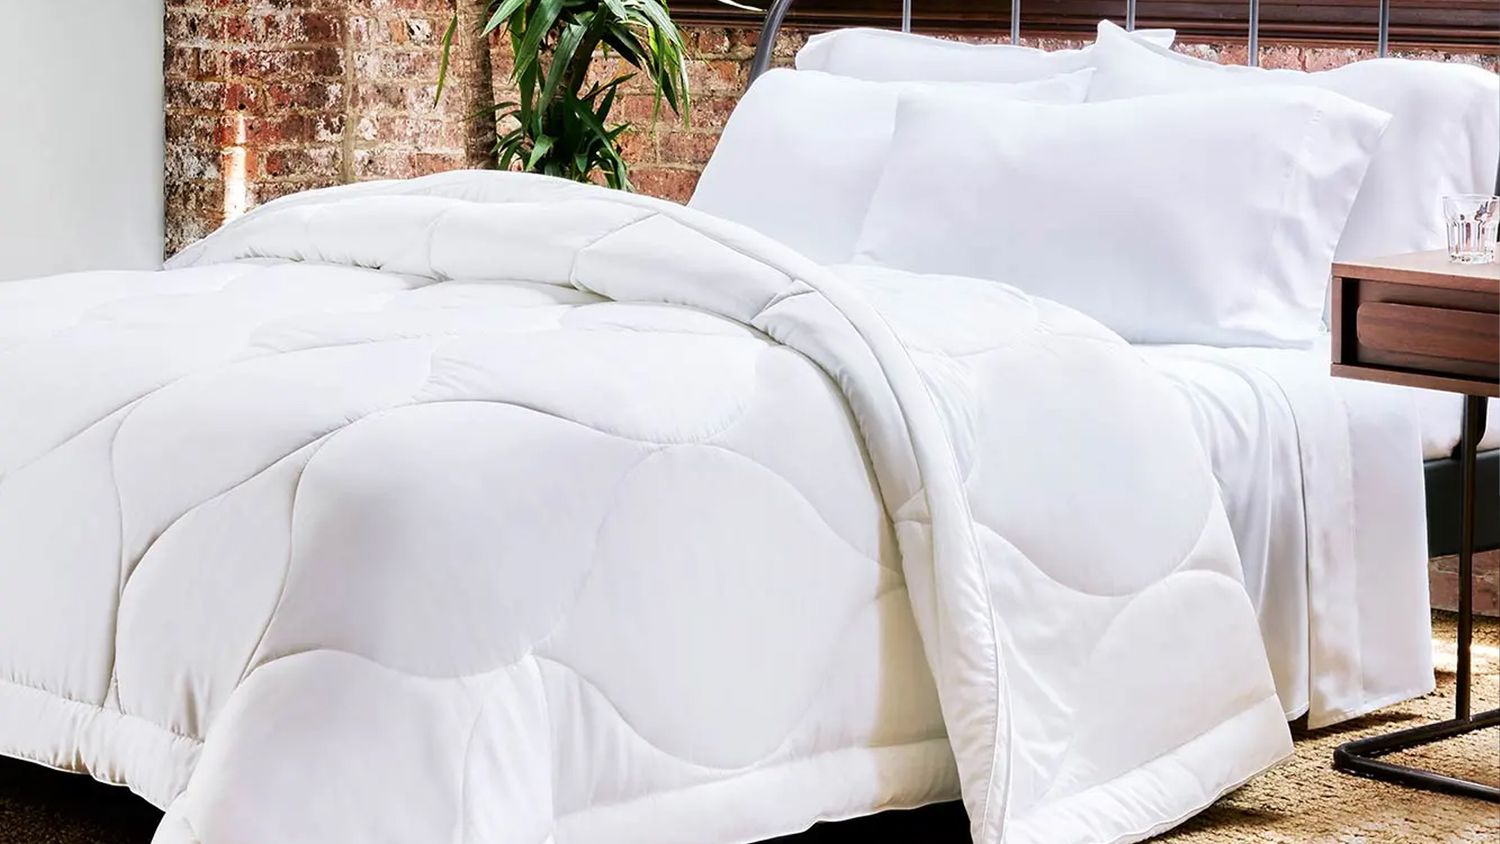 DECROOM Clearance Sale,White Comforter Full/Queen Size Down Alternative Quilted 